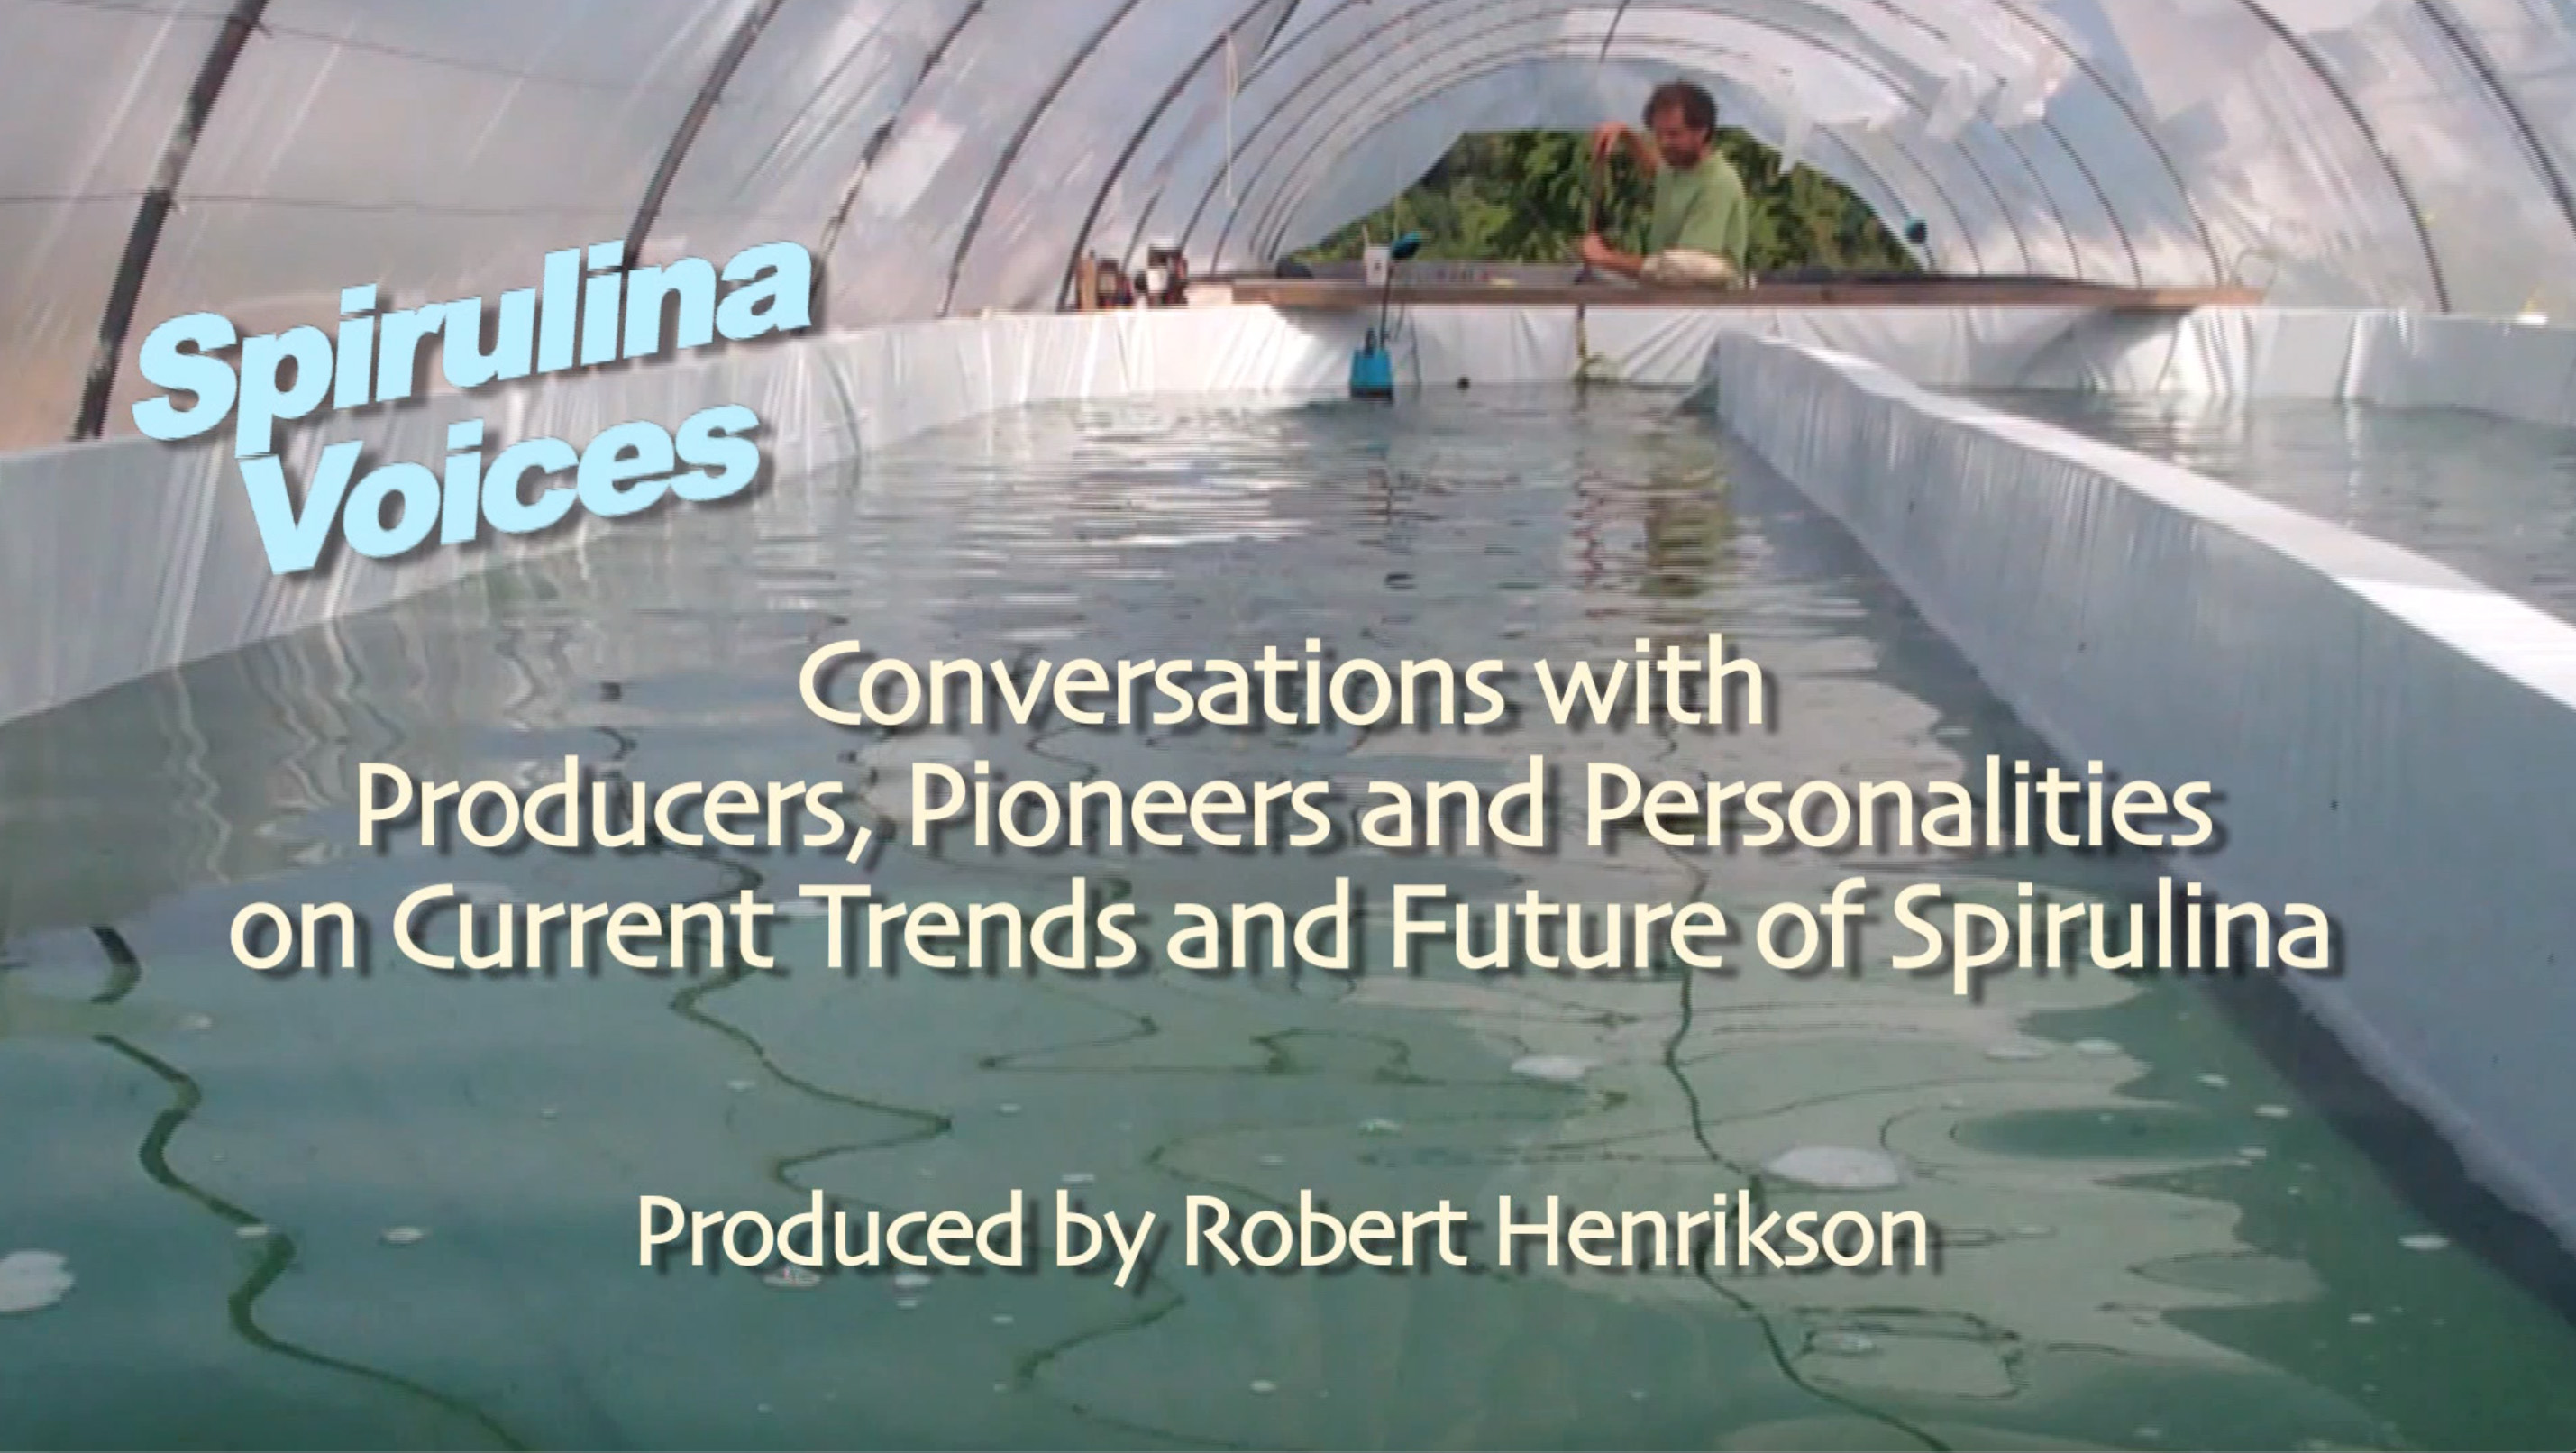 See the 1.5 minute movie trailer for the Spirulina Voices video series on YouTube